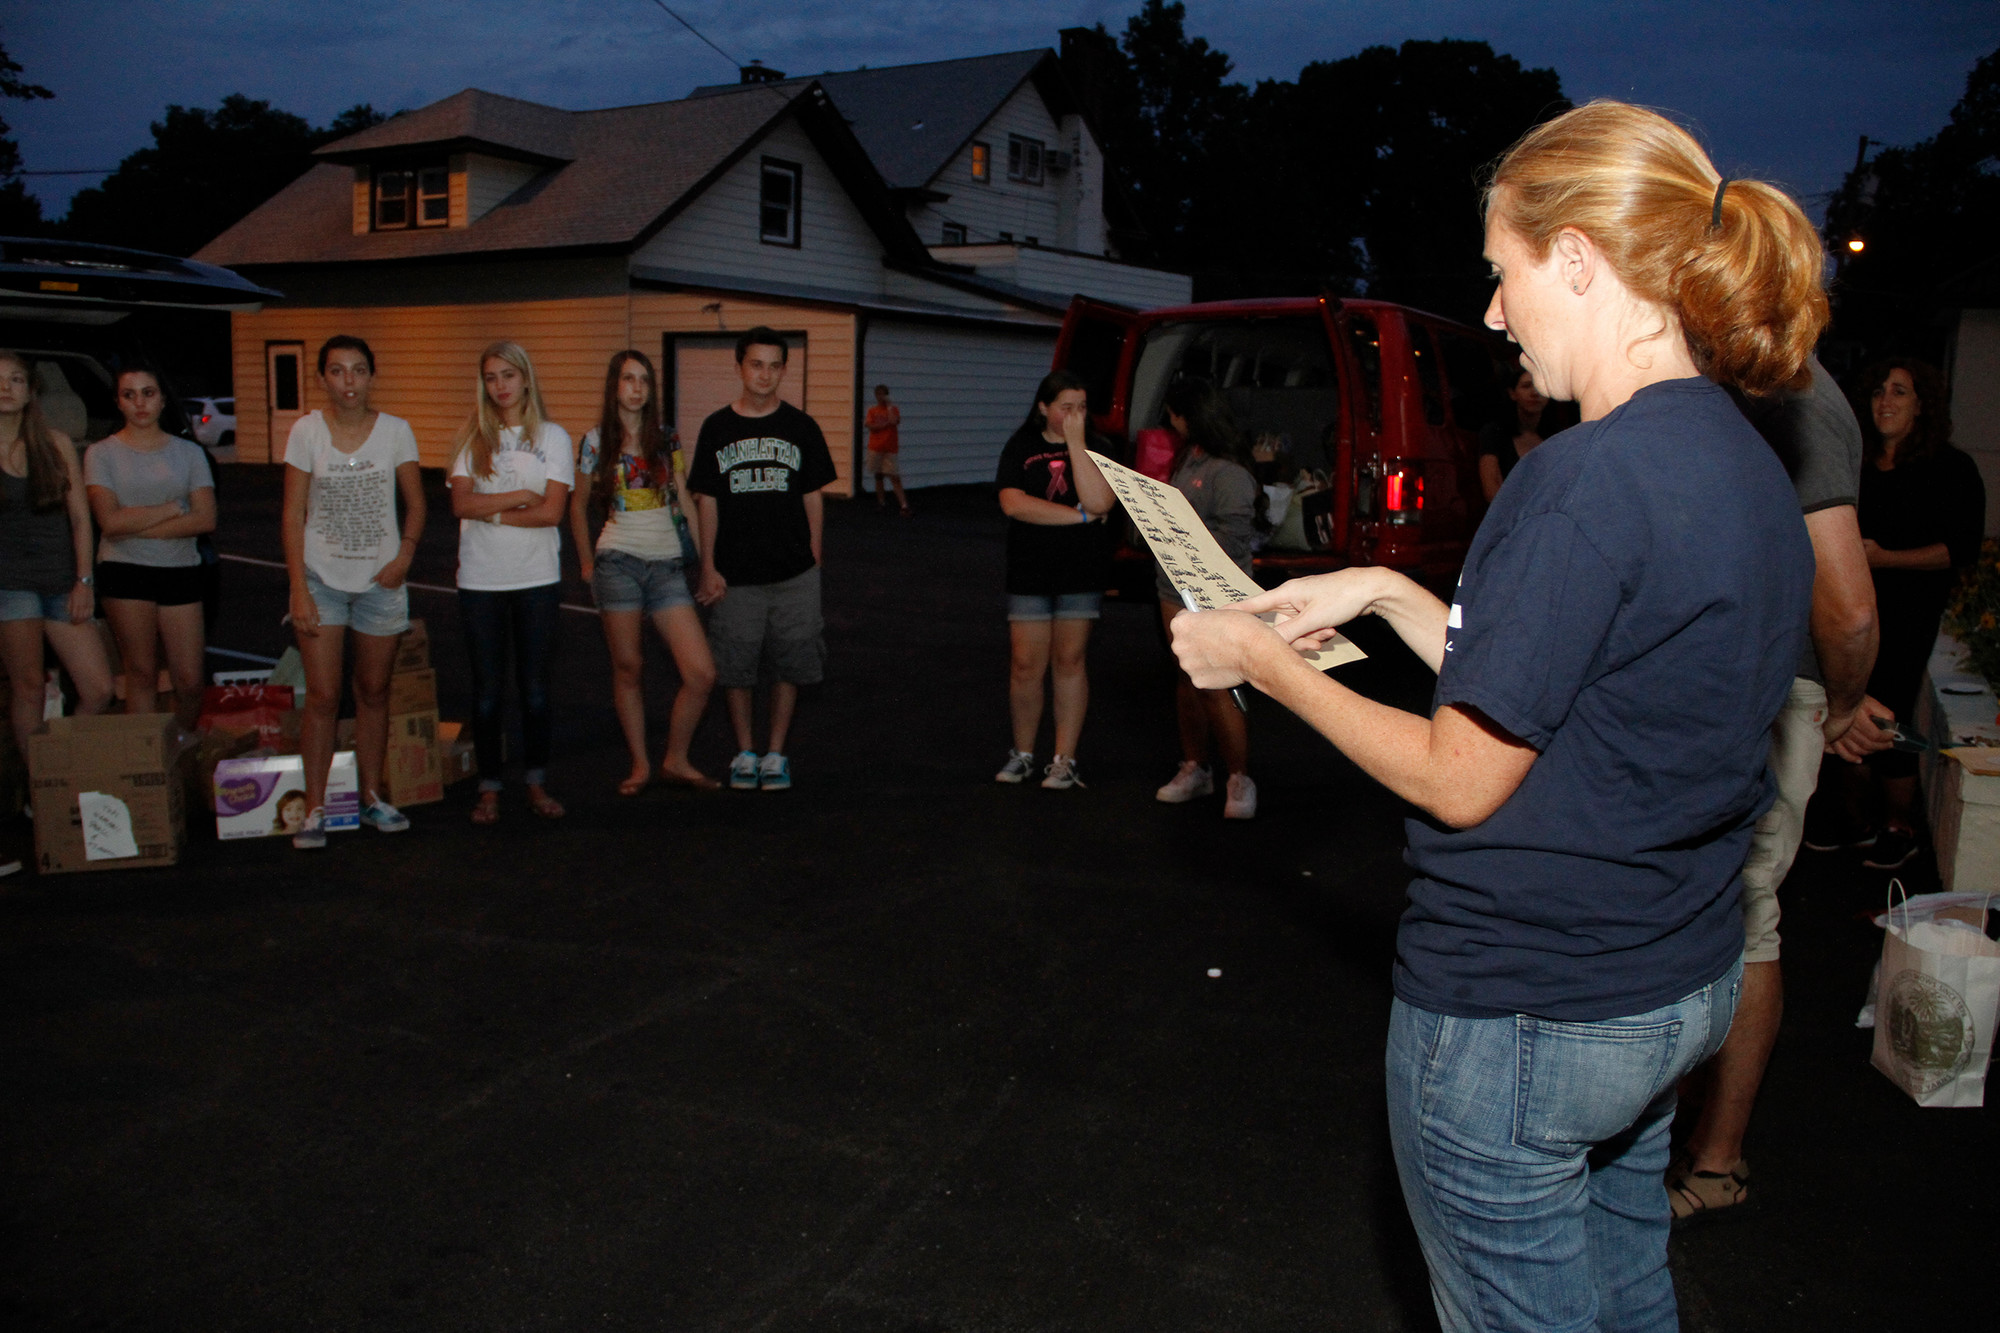 Linda Baldacchino, the Youth Ministry Director at Our Lady of Lourdes, gives out car assignments.